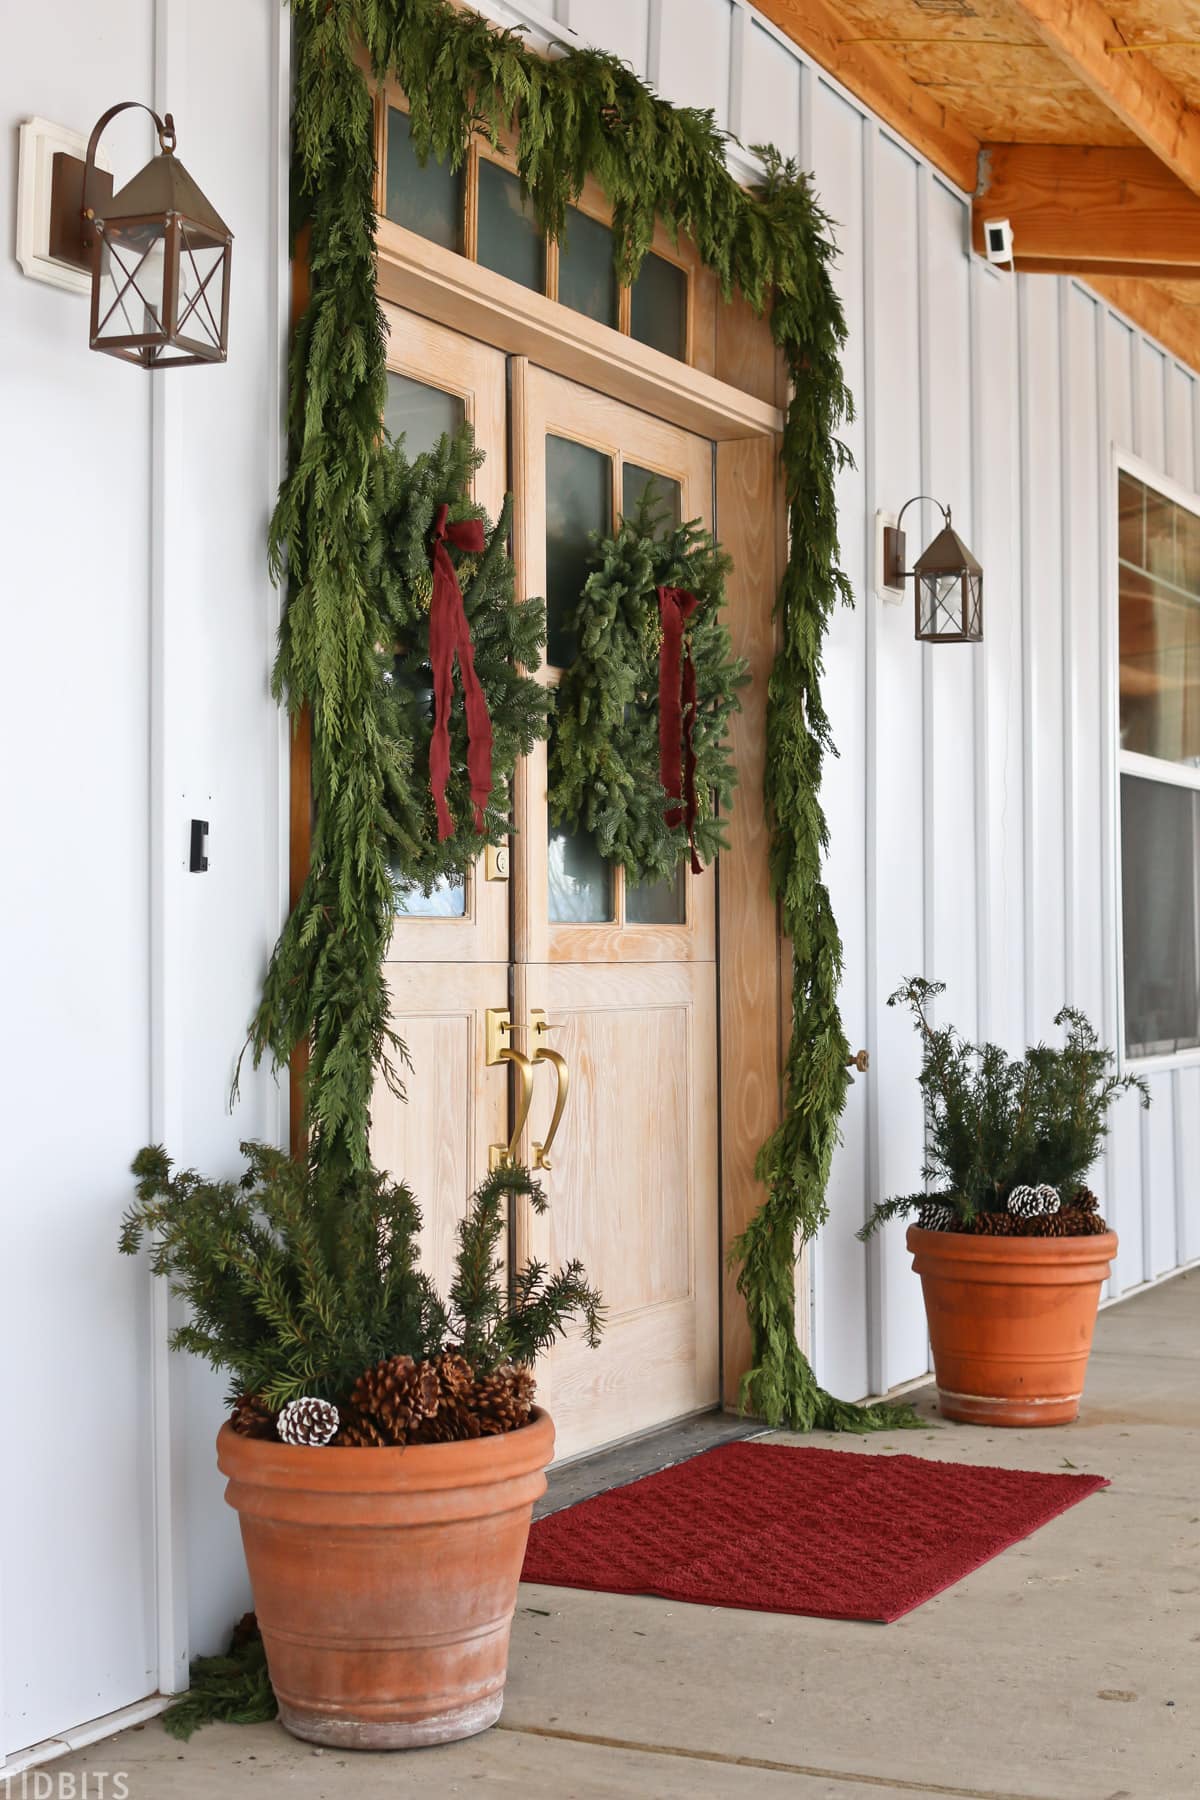 cedar garland and wreaths hang on a front door at christmas time.